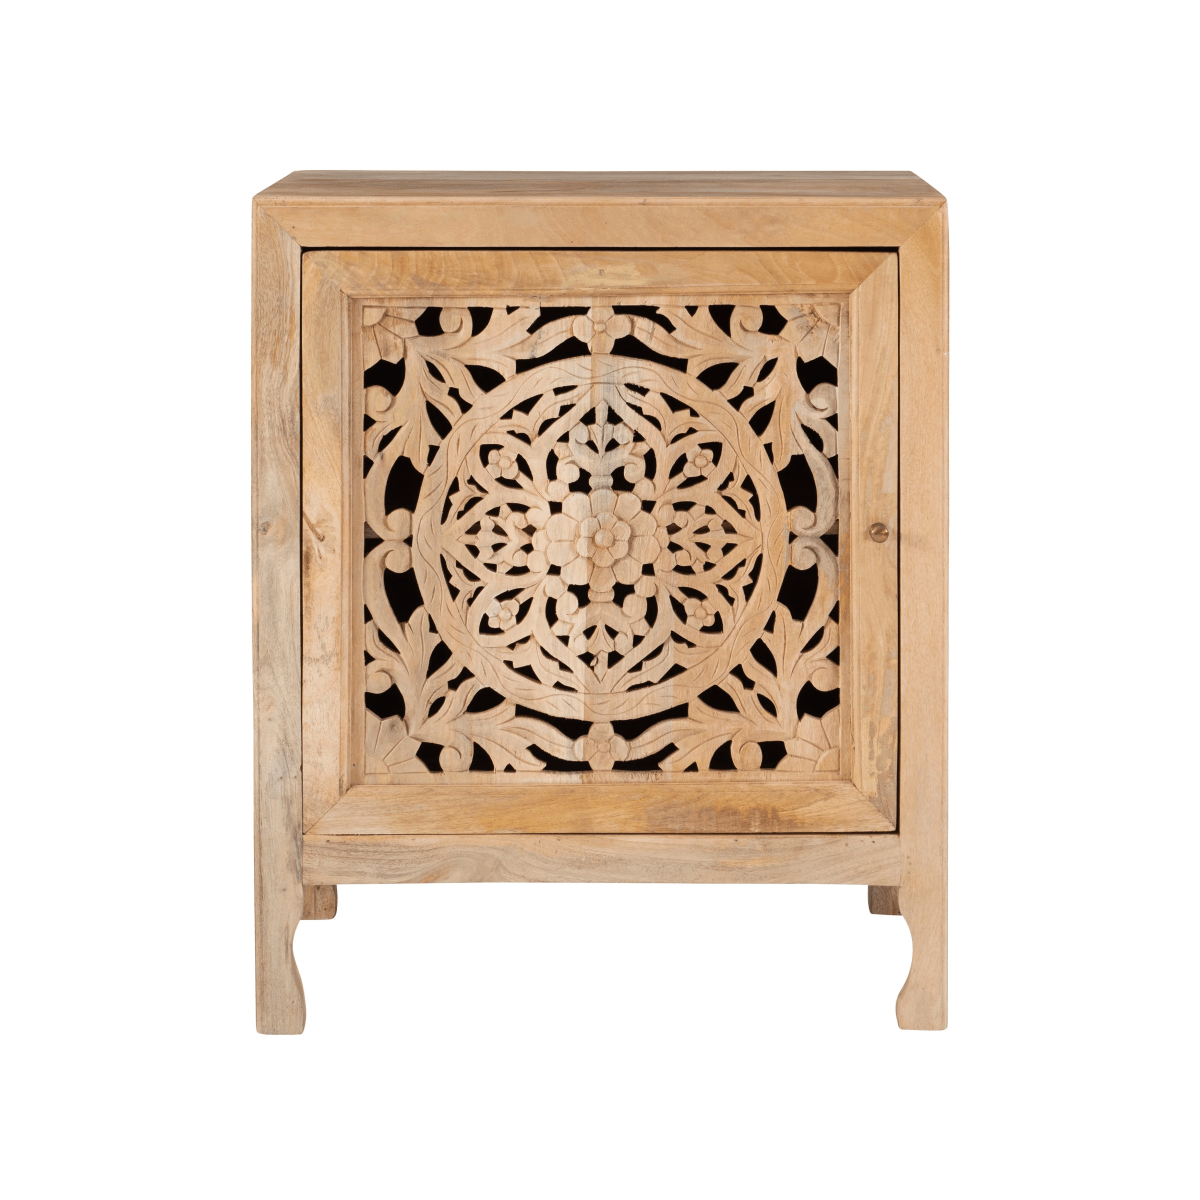 Hand Carved Wooden Cabinet | Handmade Indian Design Cabinetry Furniture Cabinet - Bone Inlay Furnitures